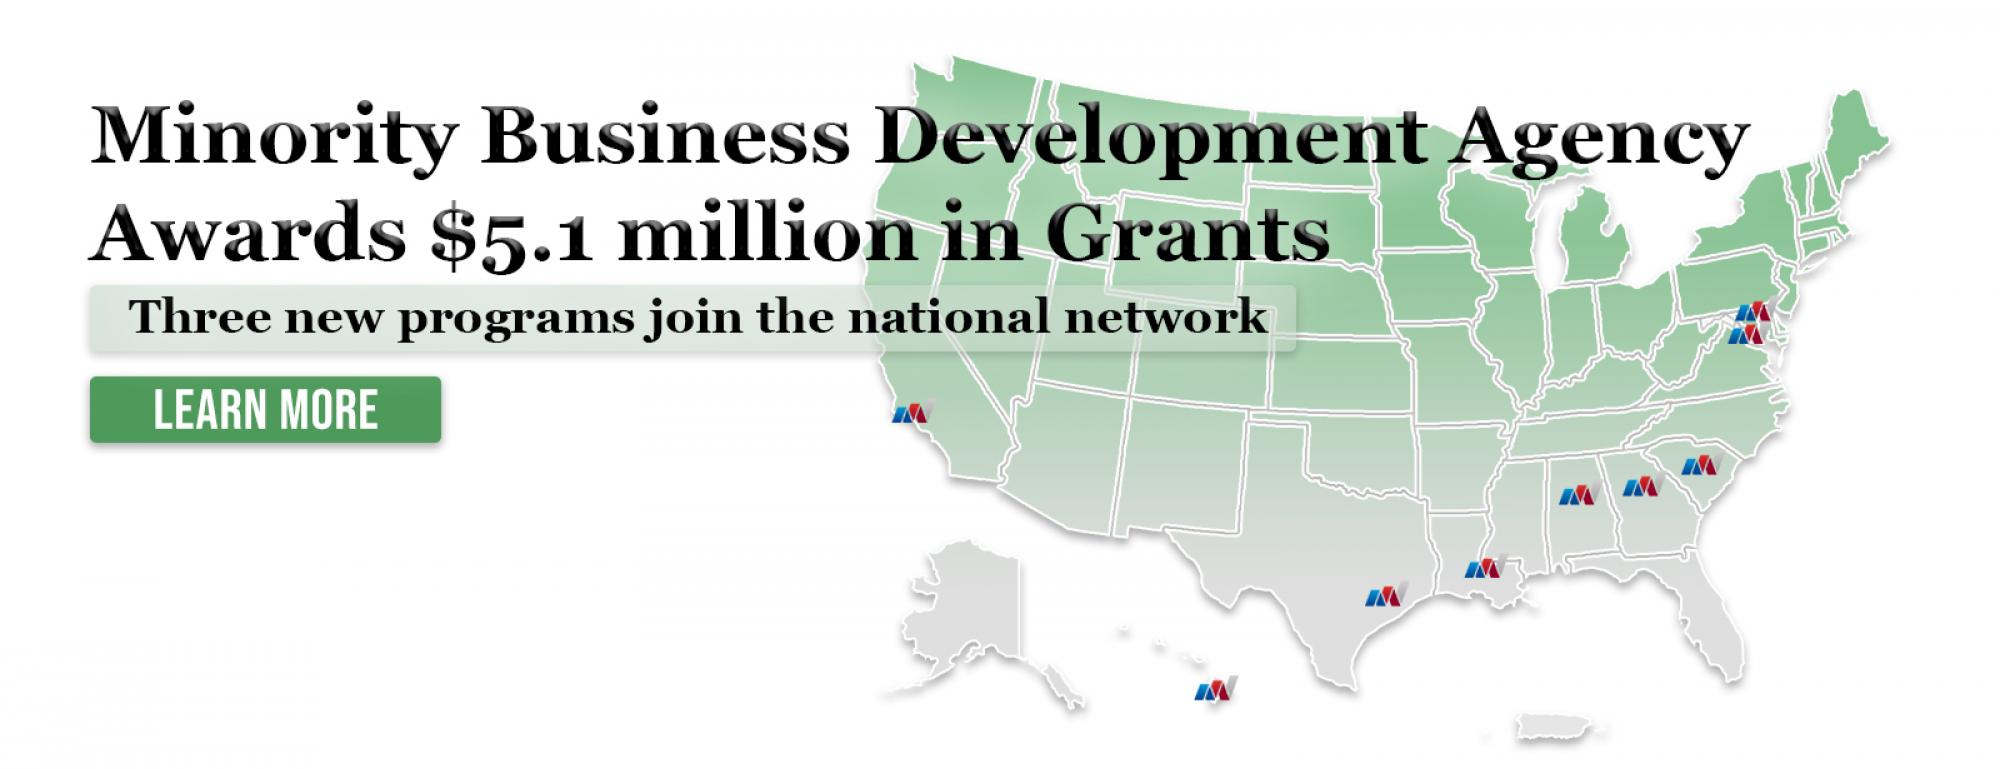 Minority Business Development Agency Awards $5.1 million in Grants | Three new programs join the national network | Learn More